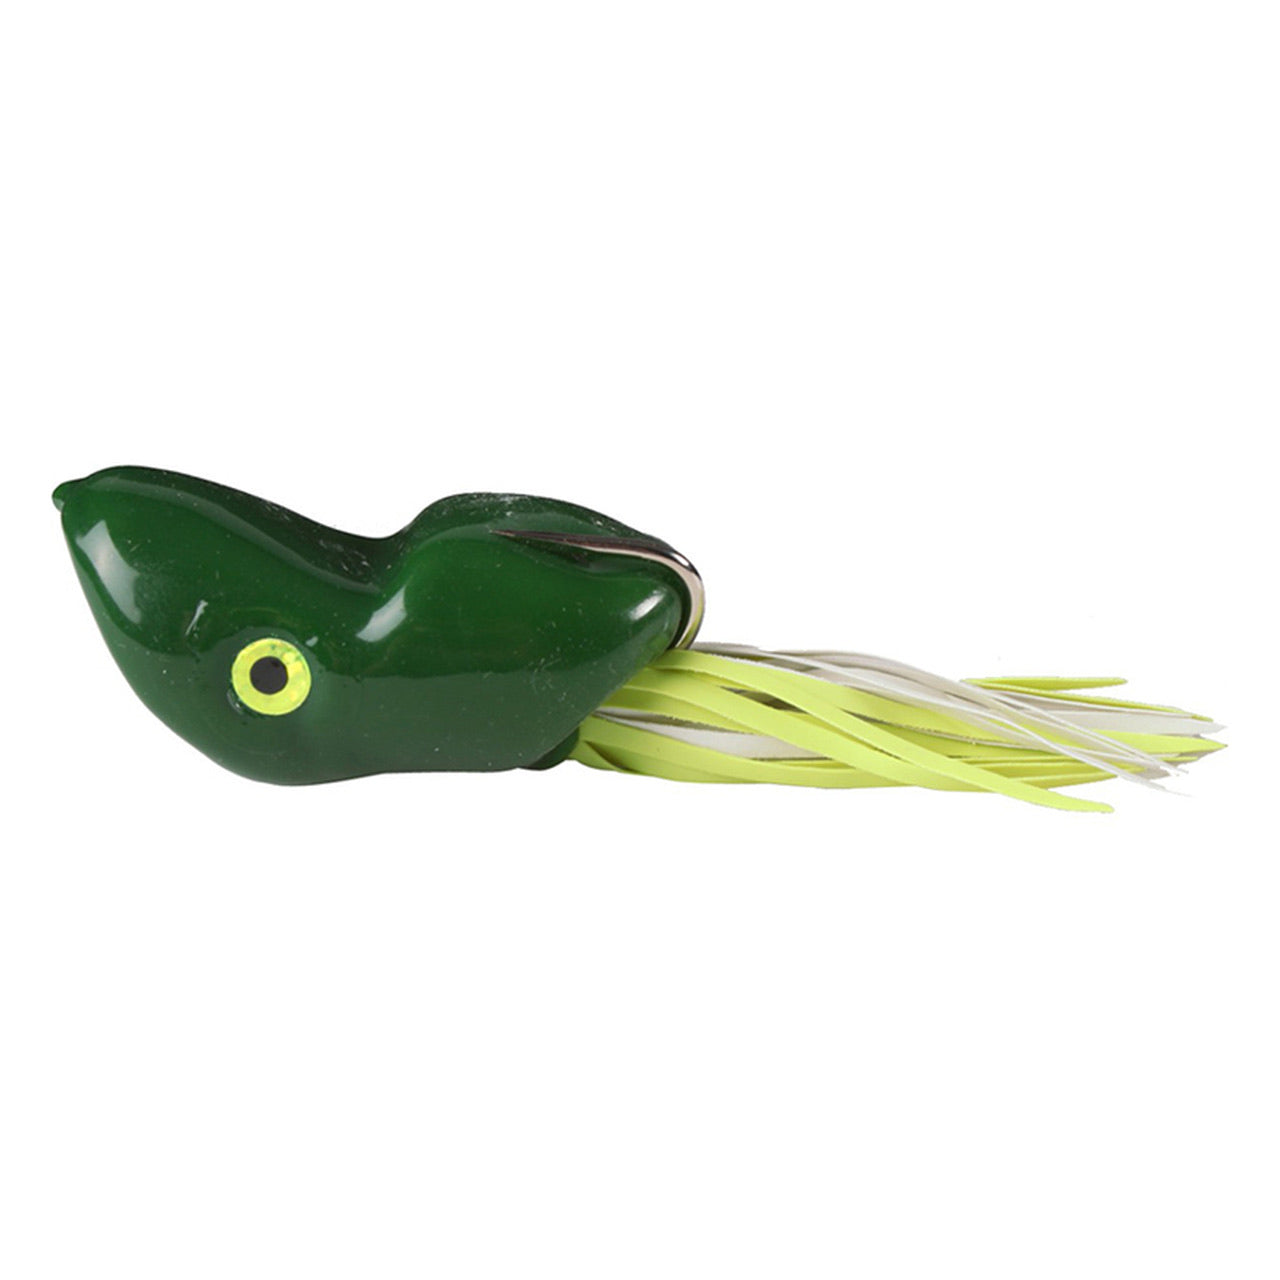 Southern Lure Scum Frog Weedless Popper - Dogfish Tackle & Marine